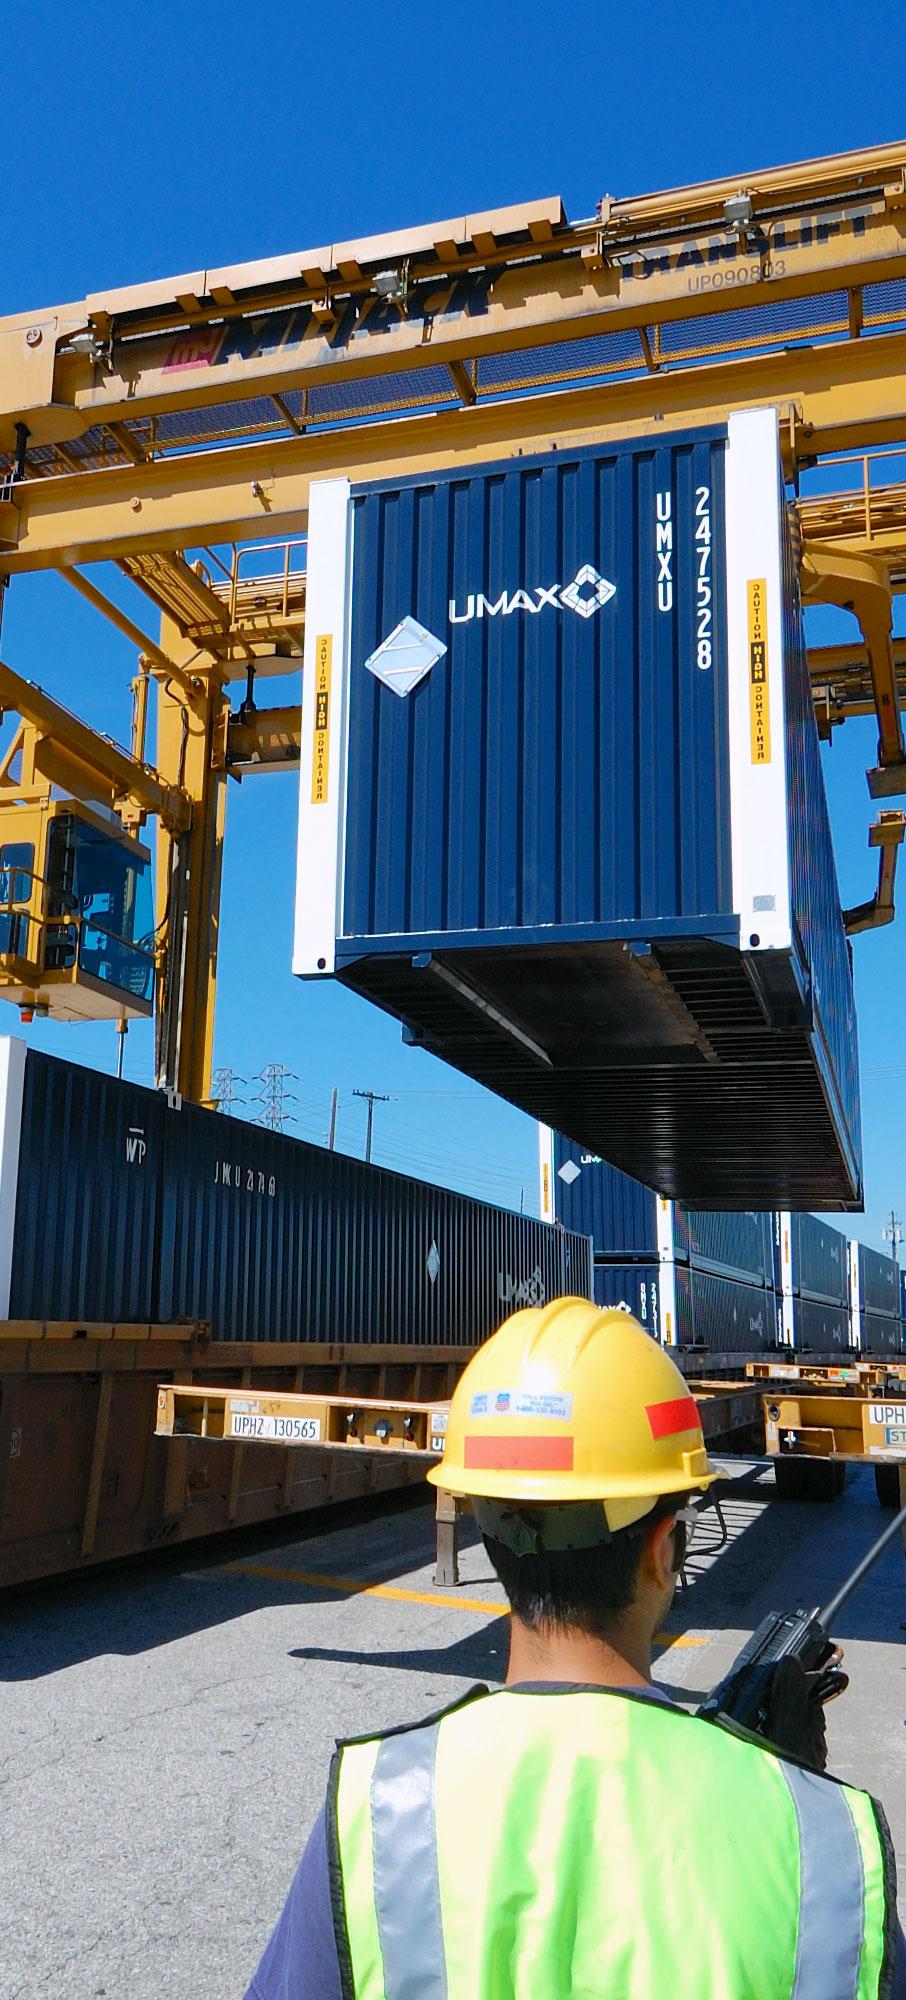 UMAX intermodal containers are being loaded onto a train for departure from City of Industry in Los Angeles, California.